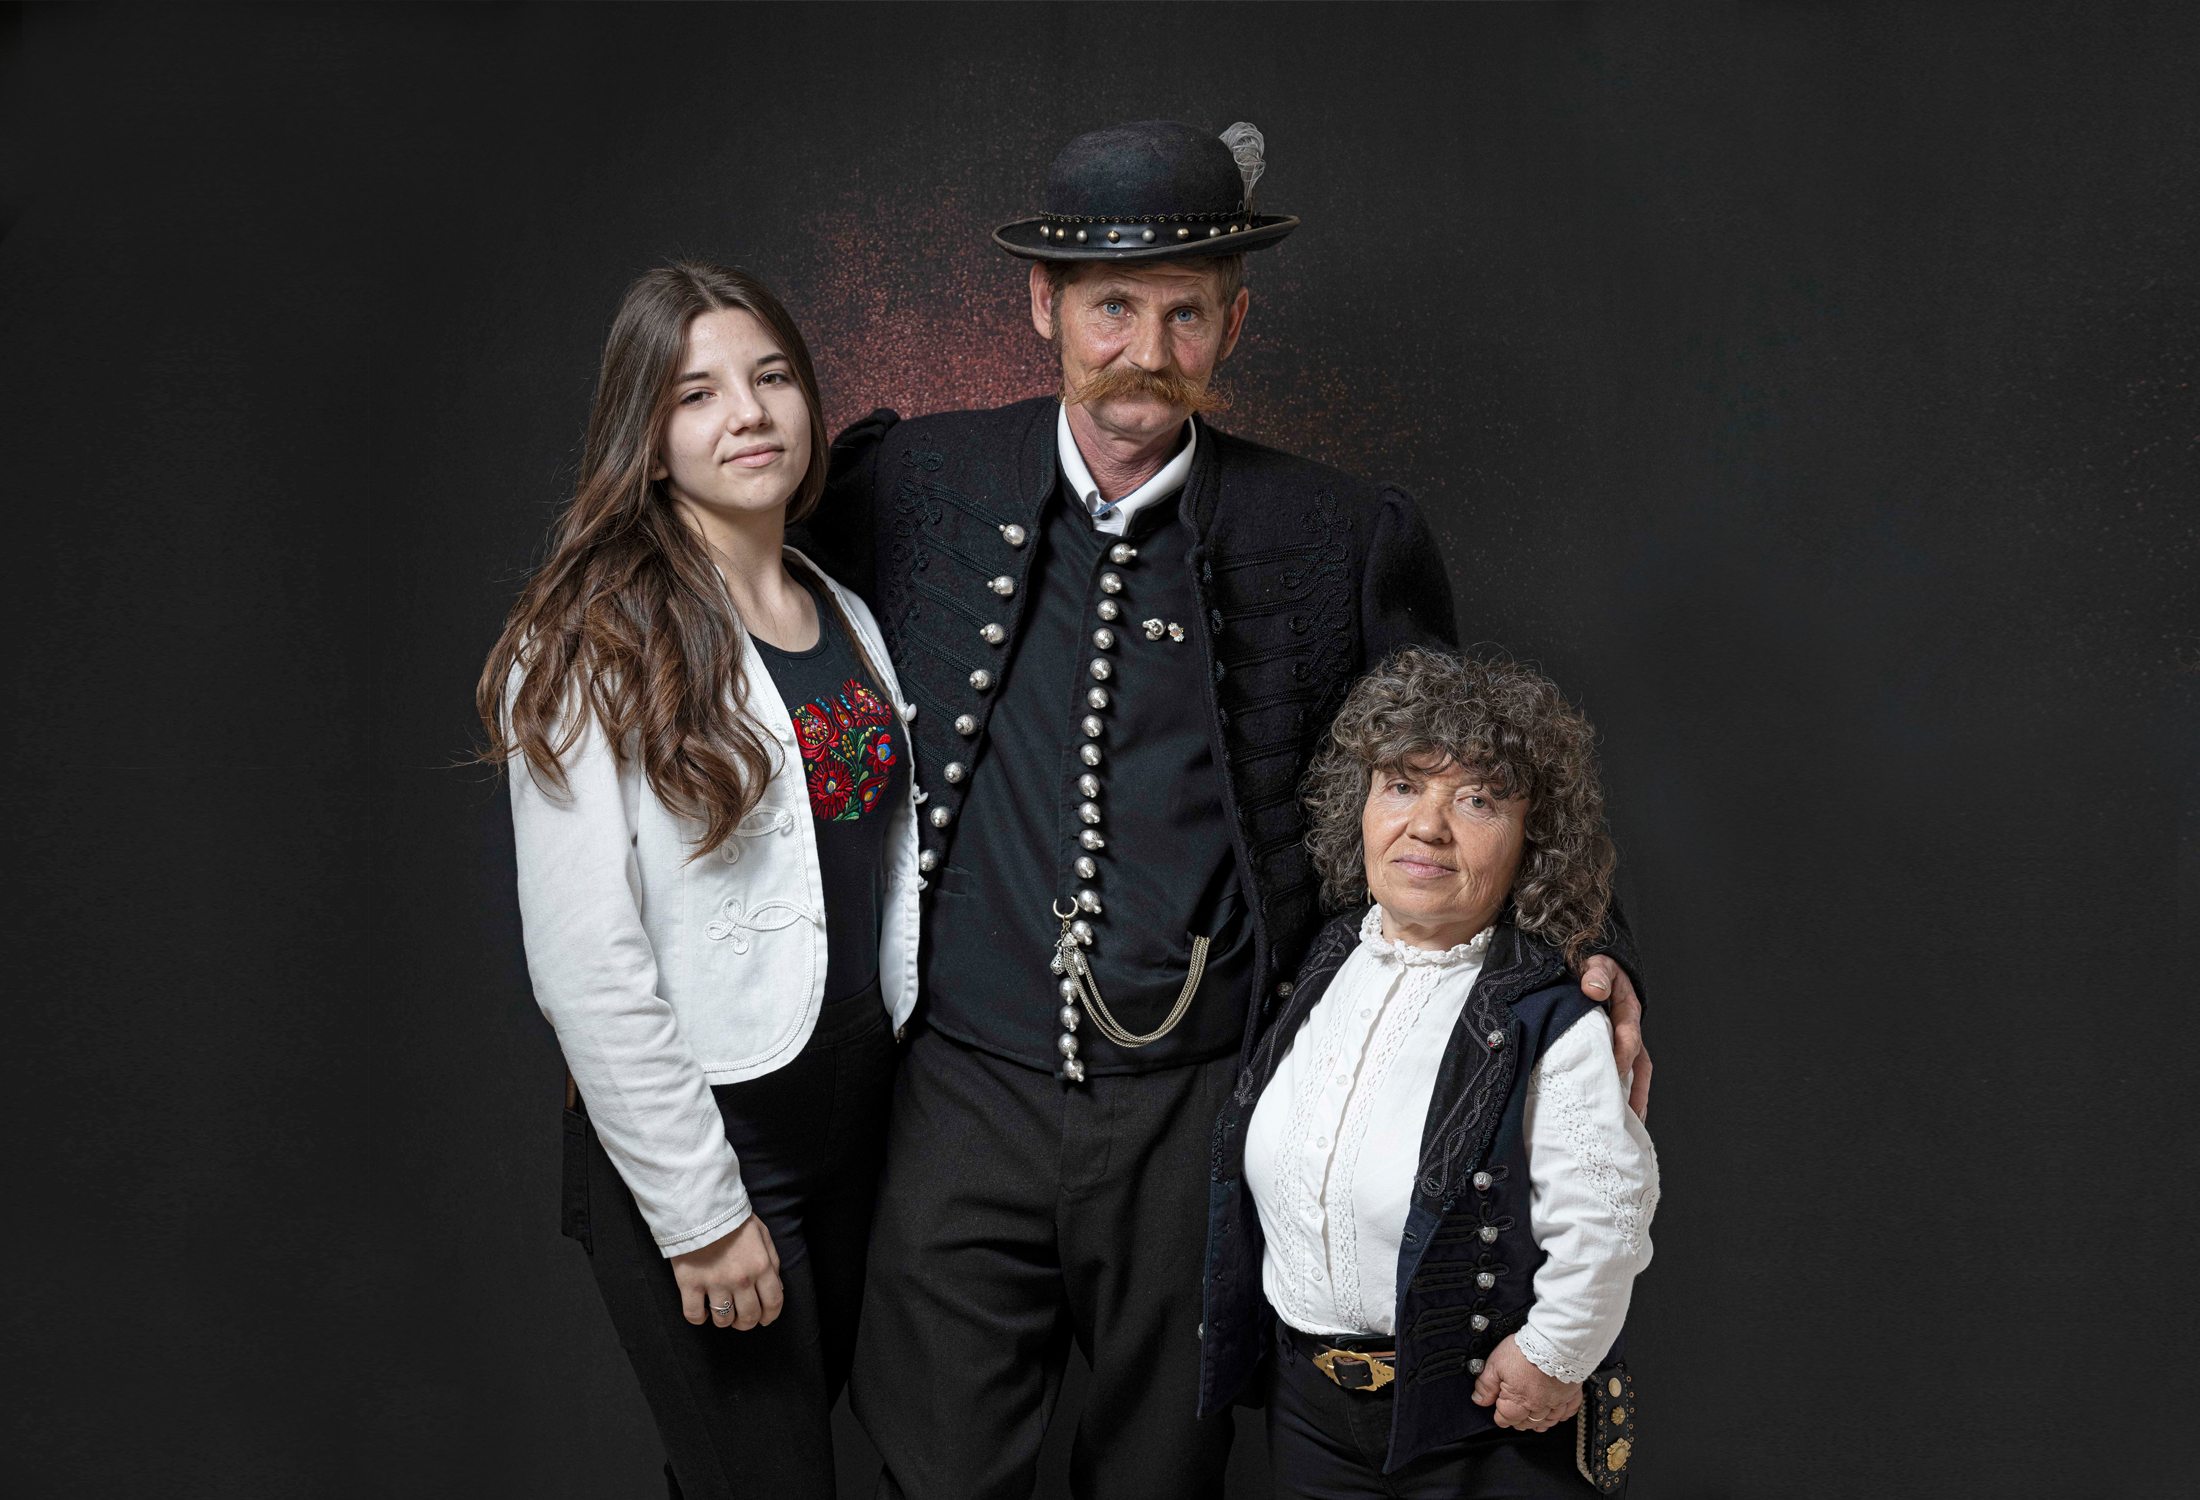 László Sáfián with his wife and daughter in traditional shepherd attire